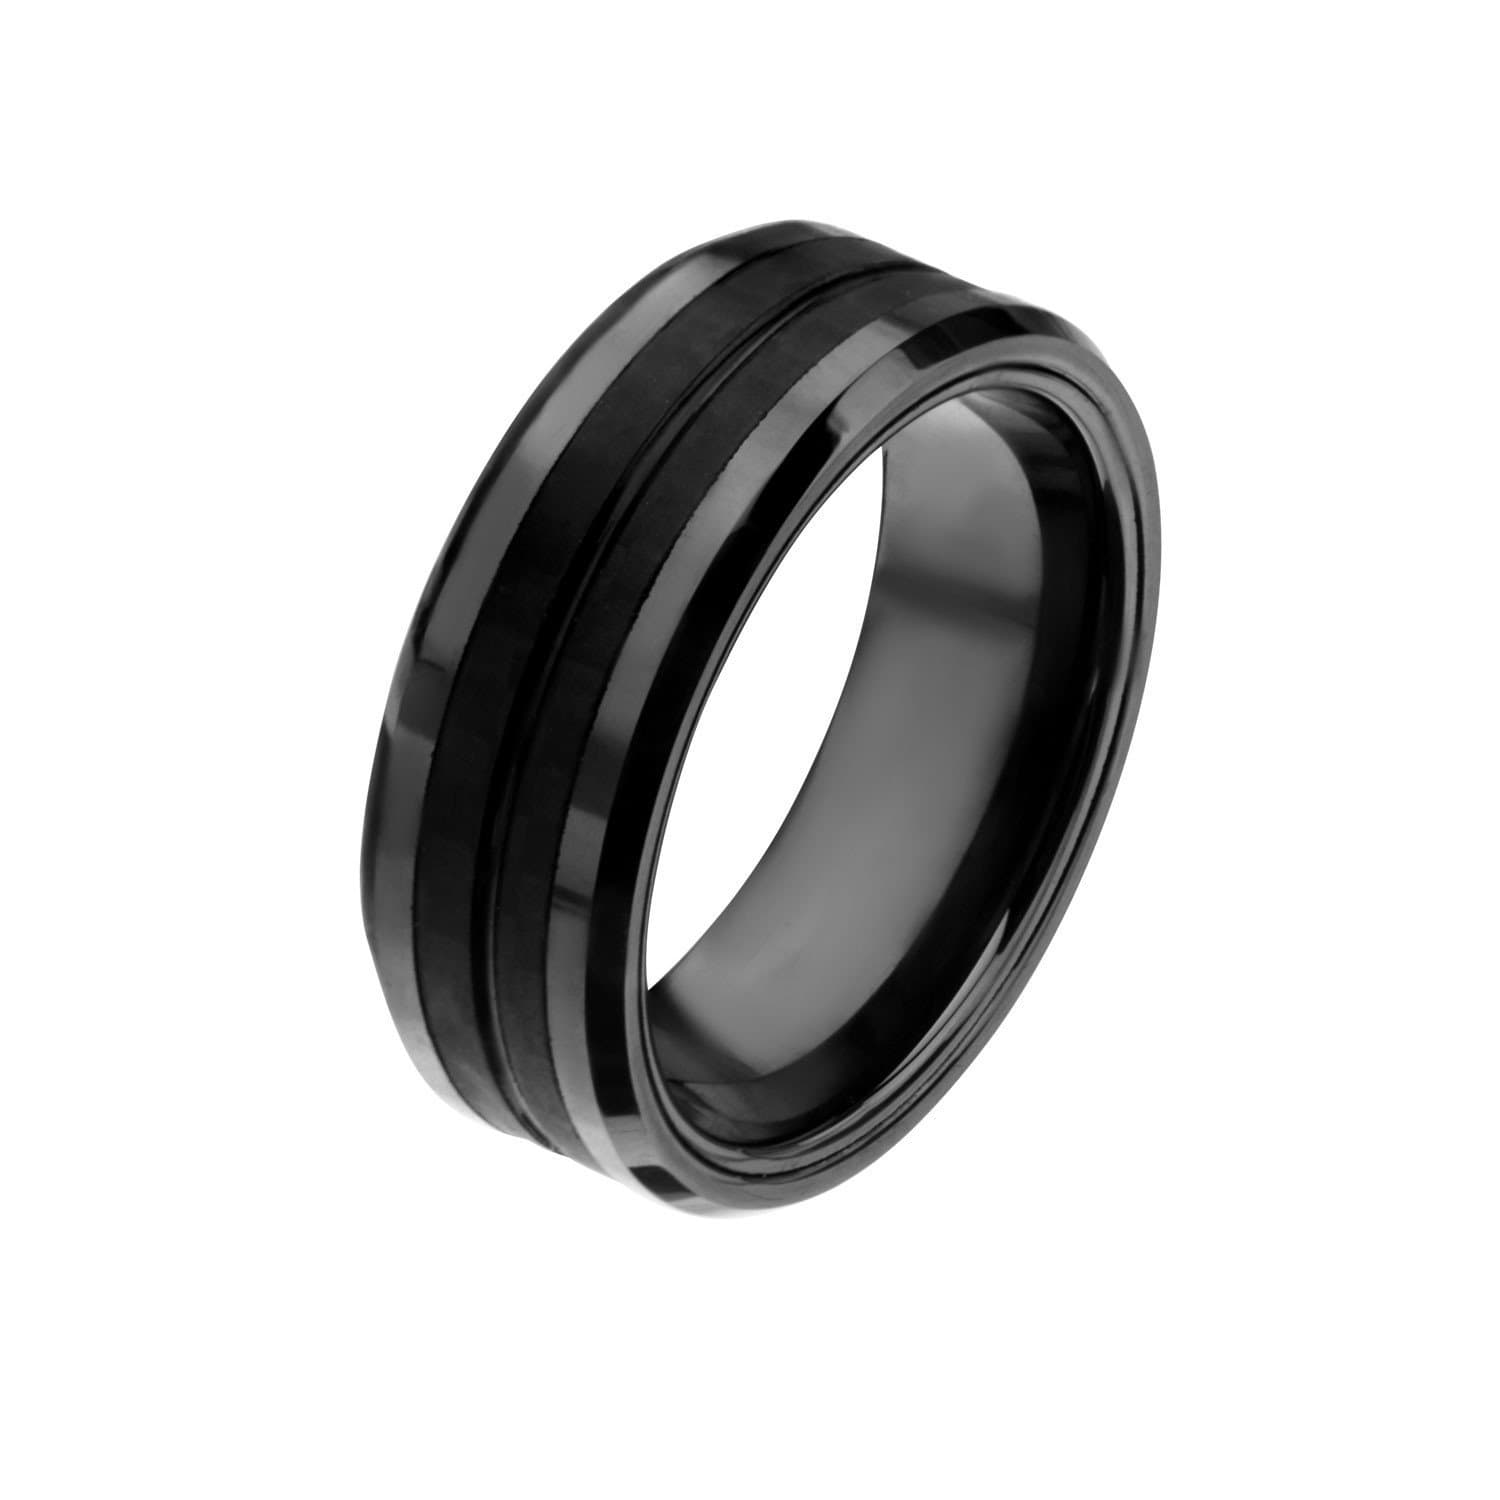 INOX JEWELRY Rings Black Stainless Steel with Double Line Center Solid Carbon Fiber Band